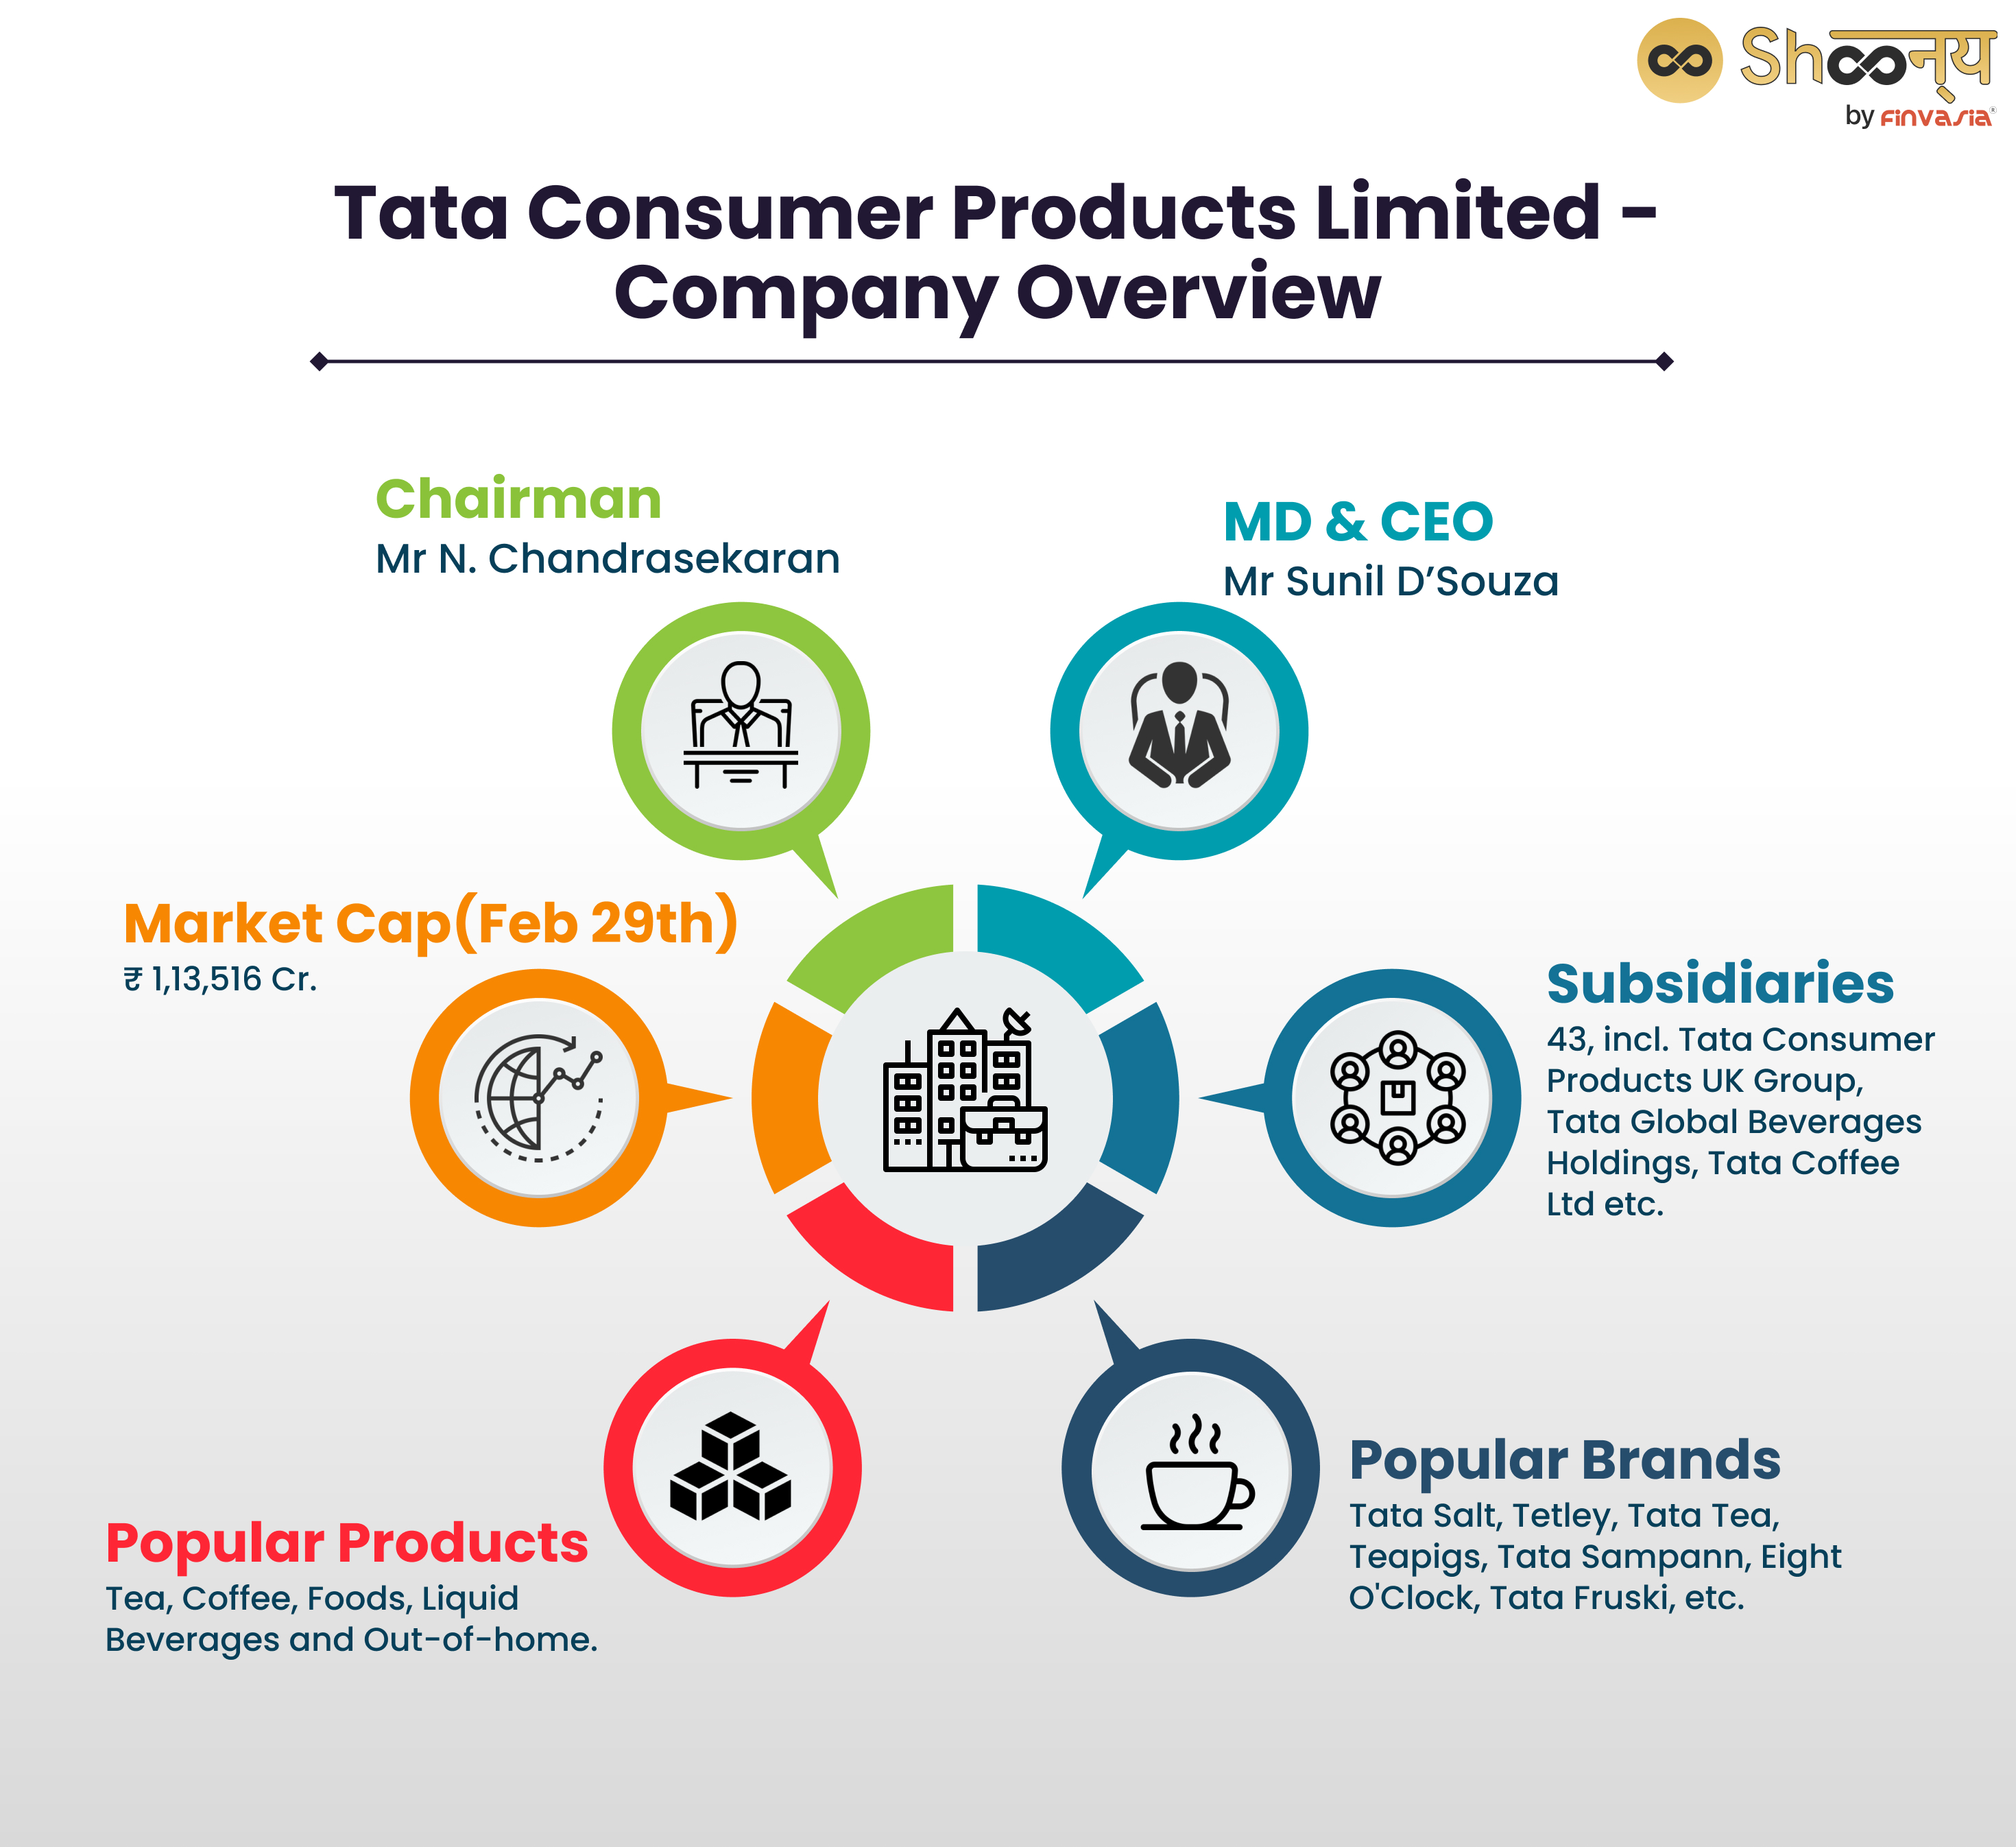 Tata Consumer Products Limited - Company Overview